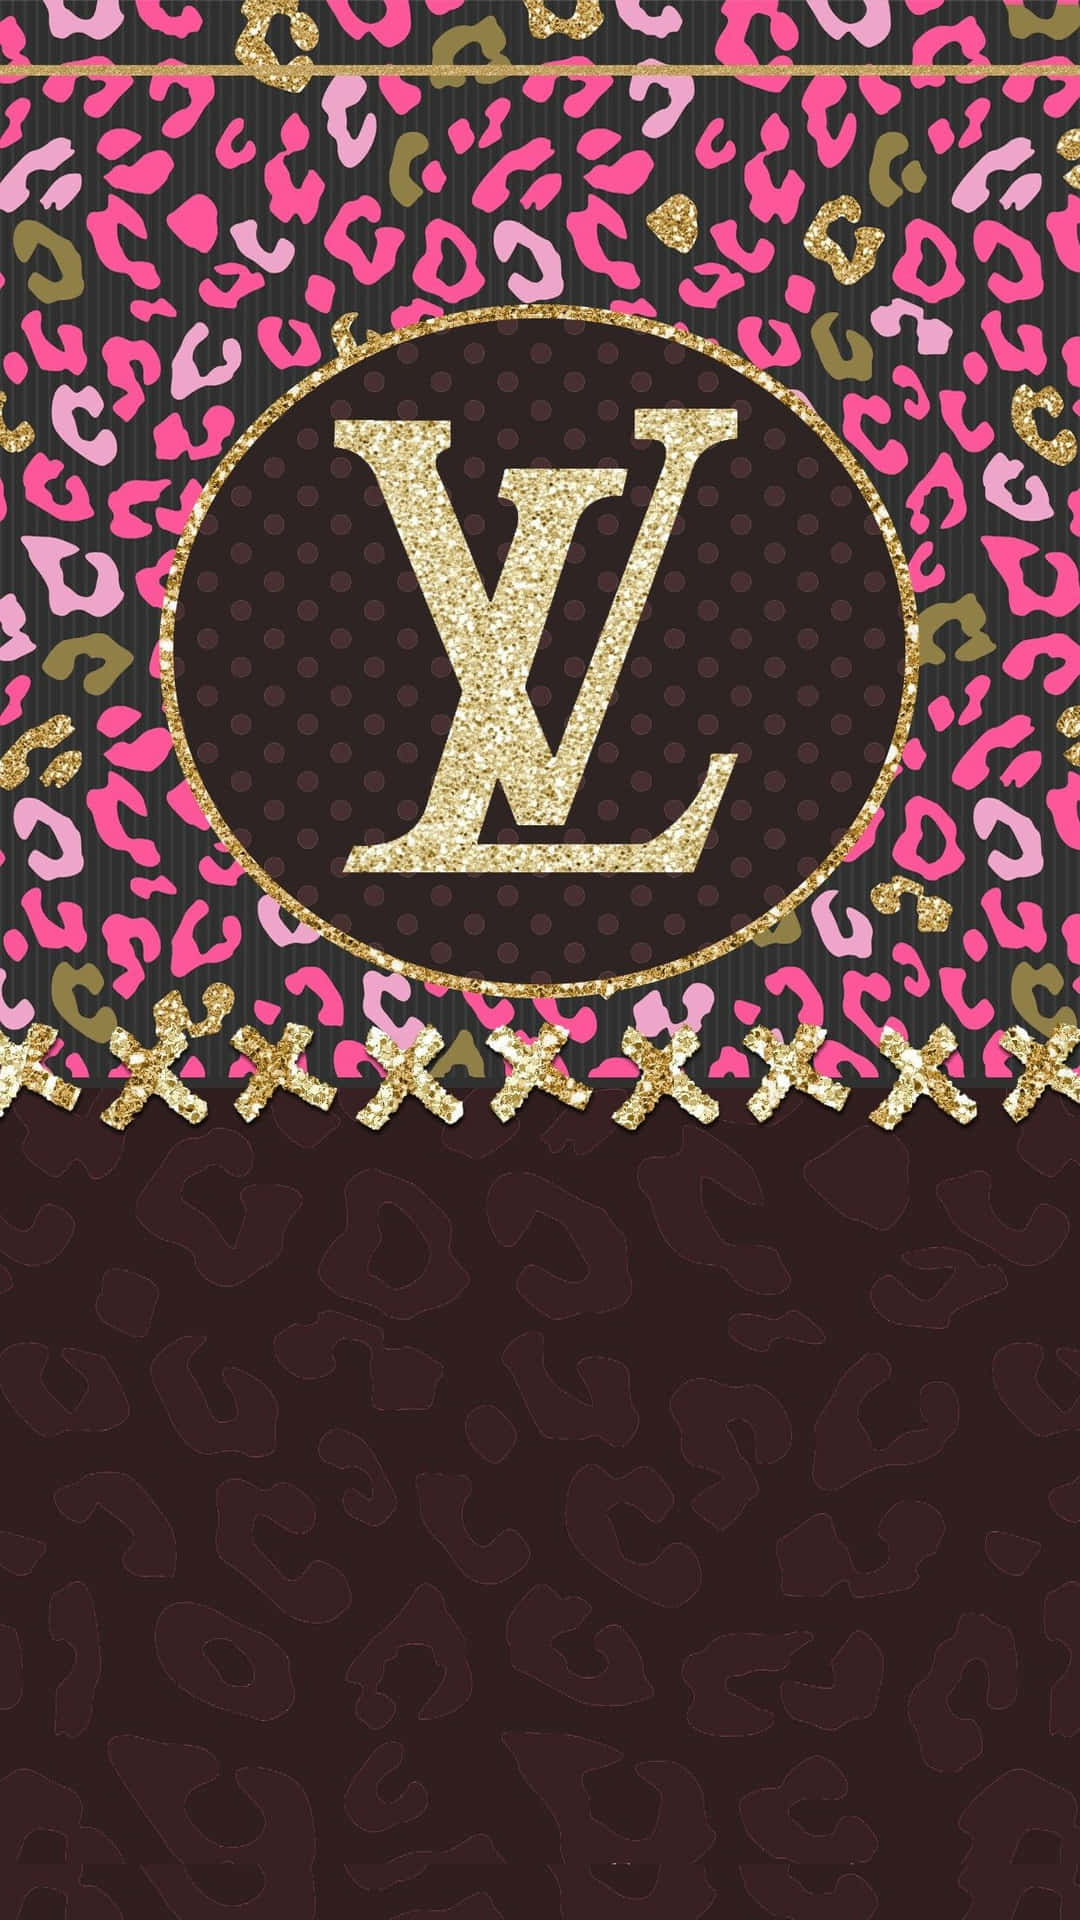 100+] Louis Vuitton Iphone Wallpapers